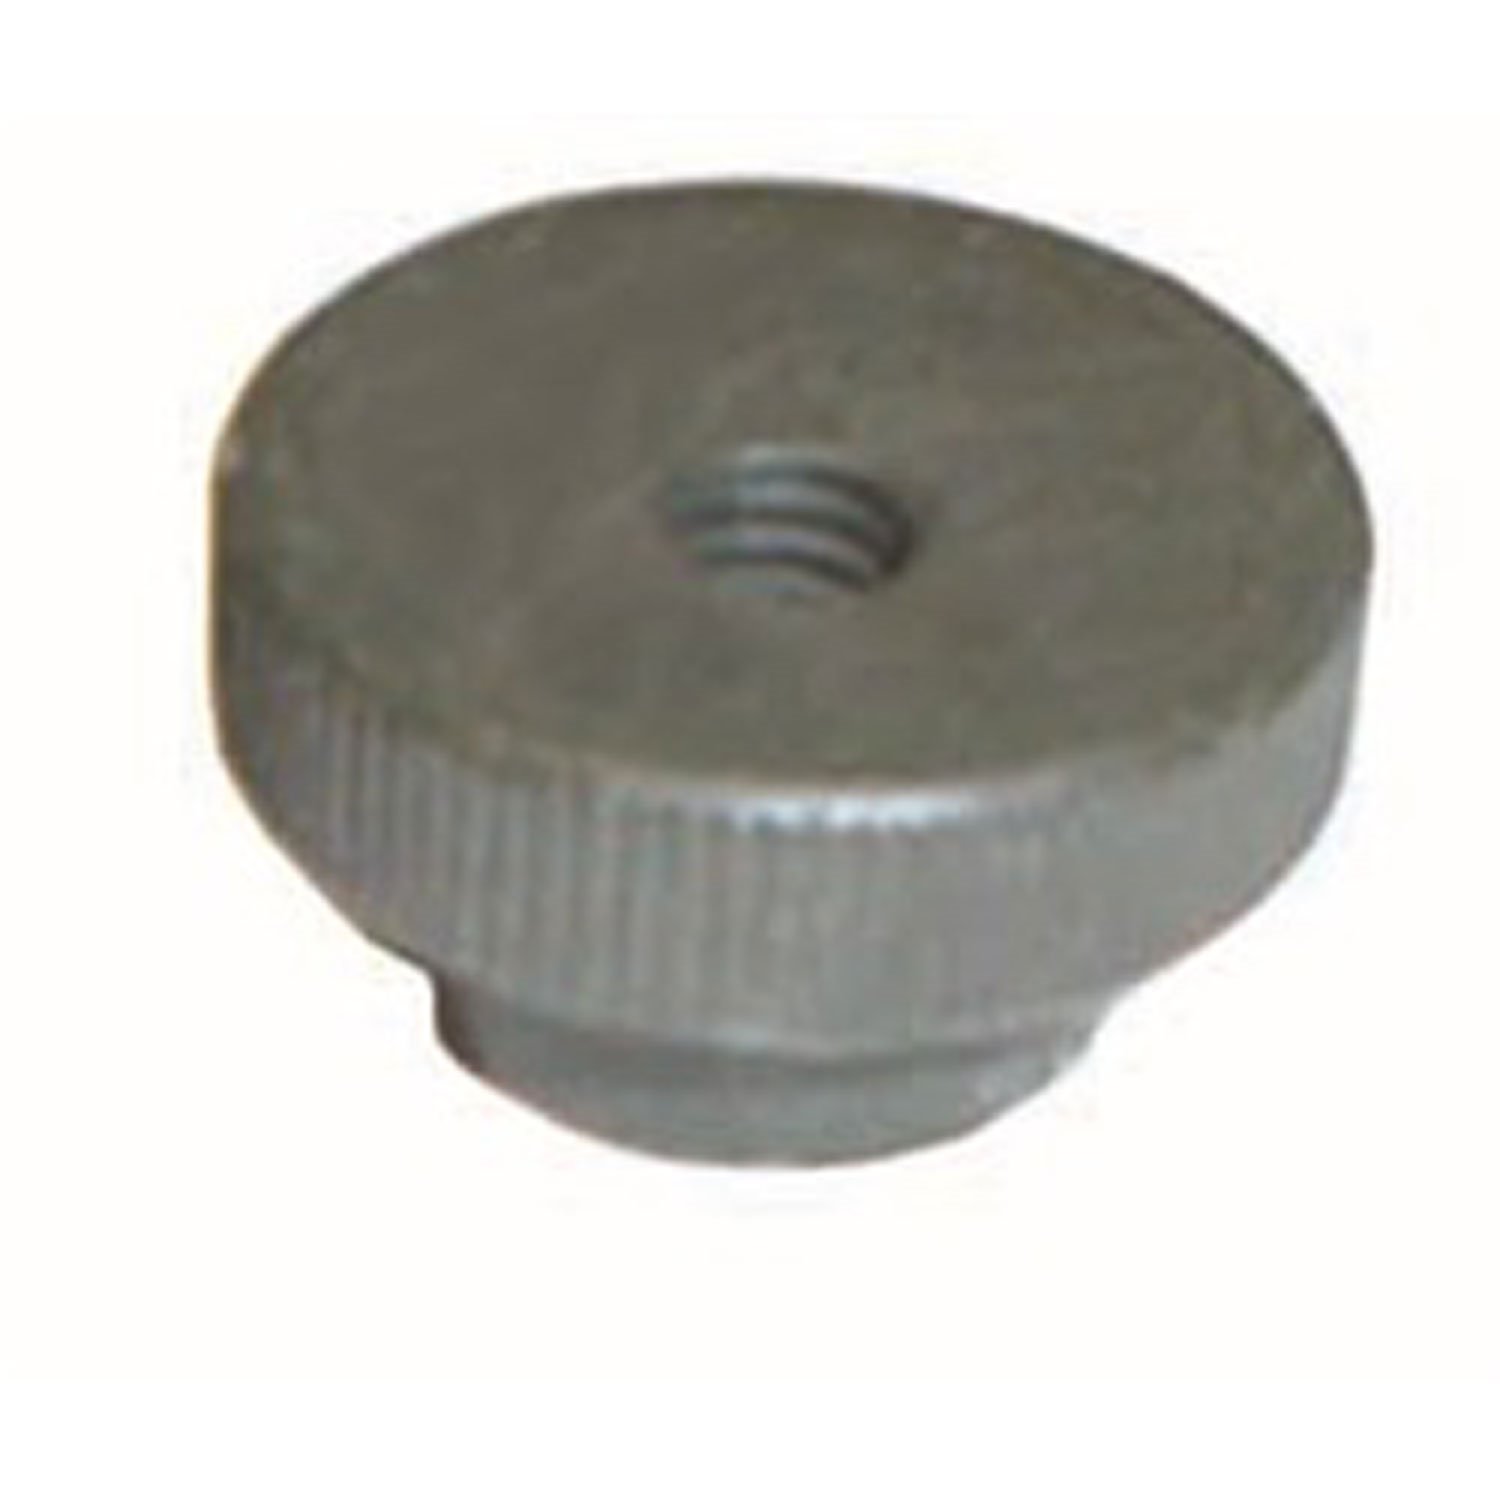 This windshield adjusting knob from Omix-ADA fits 41-45 Willys MB and Ford GPW. 2 required per windshield.